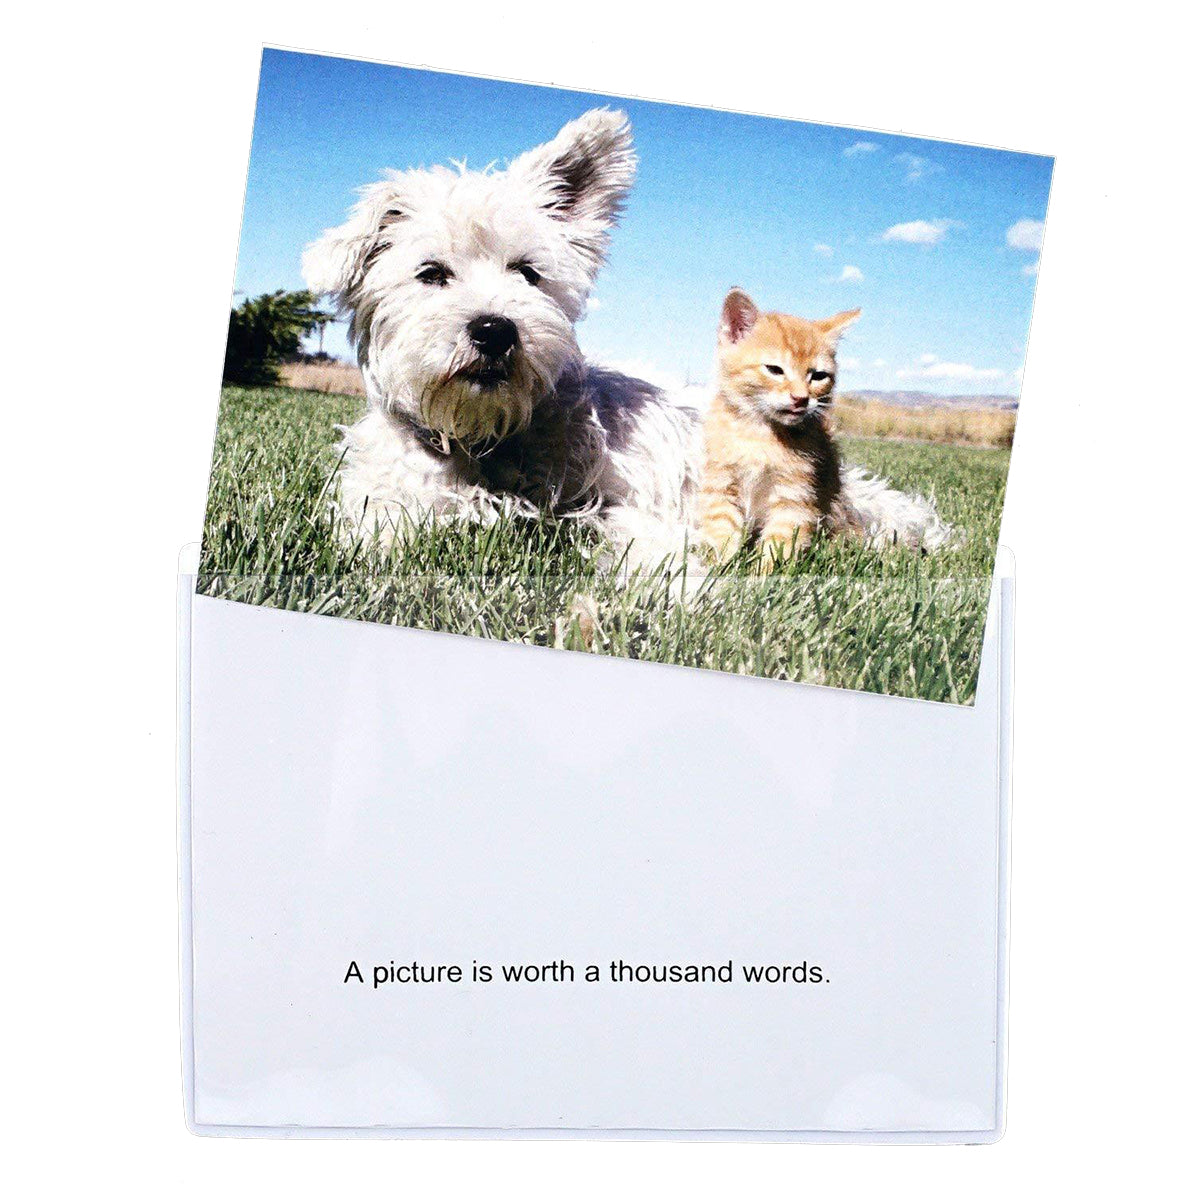 Magnetic Photo Frame - Size(6 x 4 inches) LifeKrafts